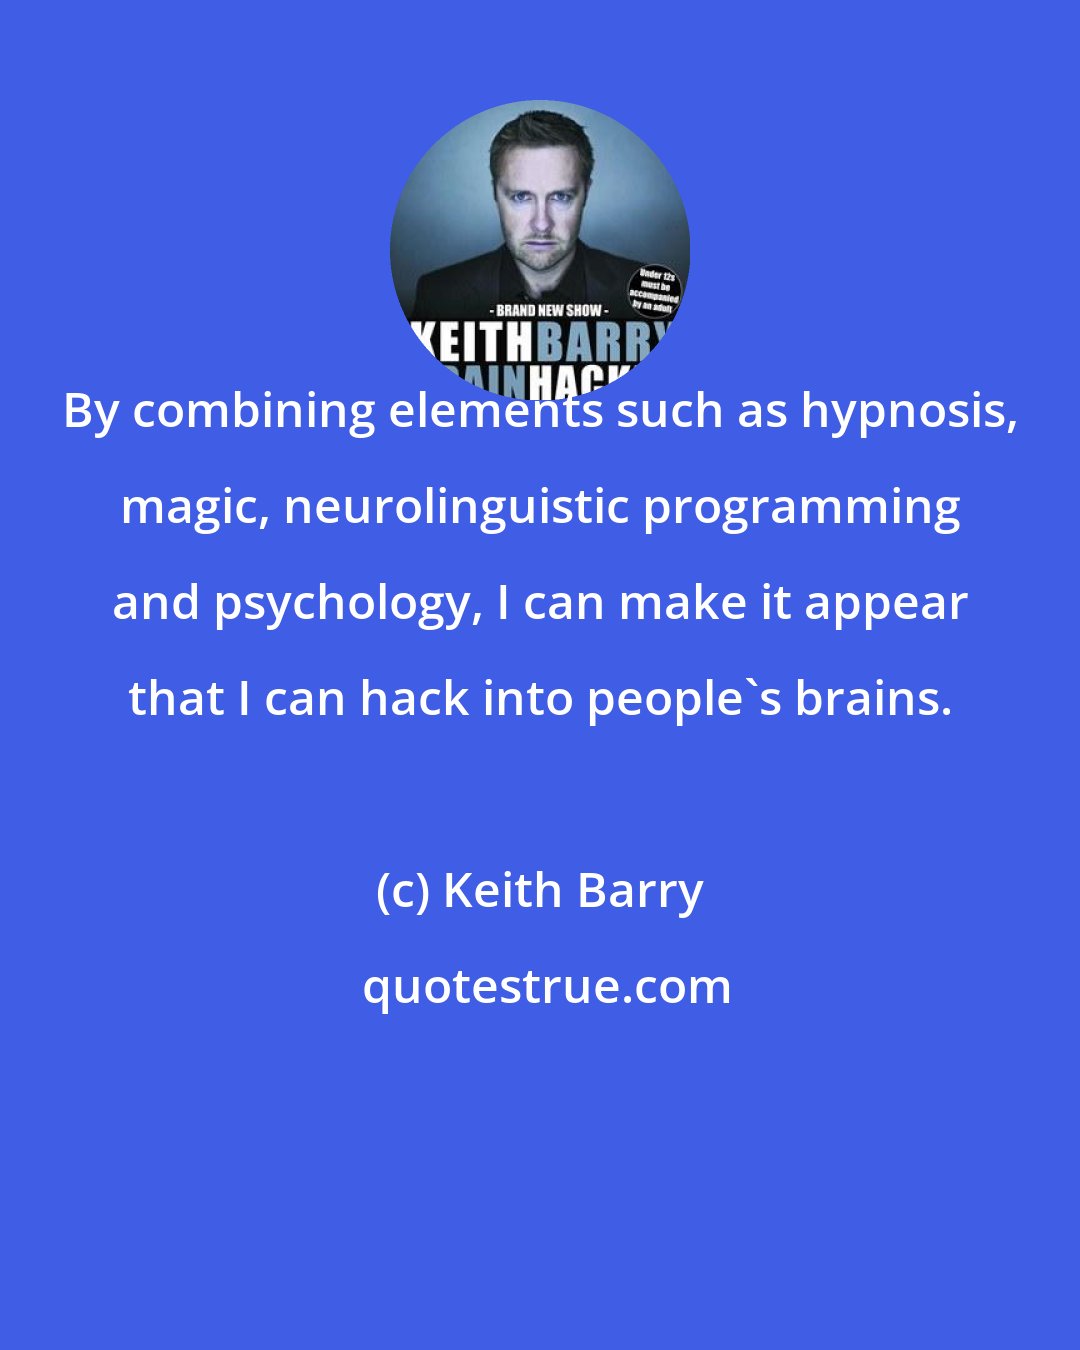 Keith Barry: By combining elements such as hypnosis, magic, neurolinguistic programming and psychology, I can make it appear that I can hack into people's brains.